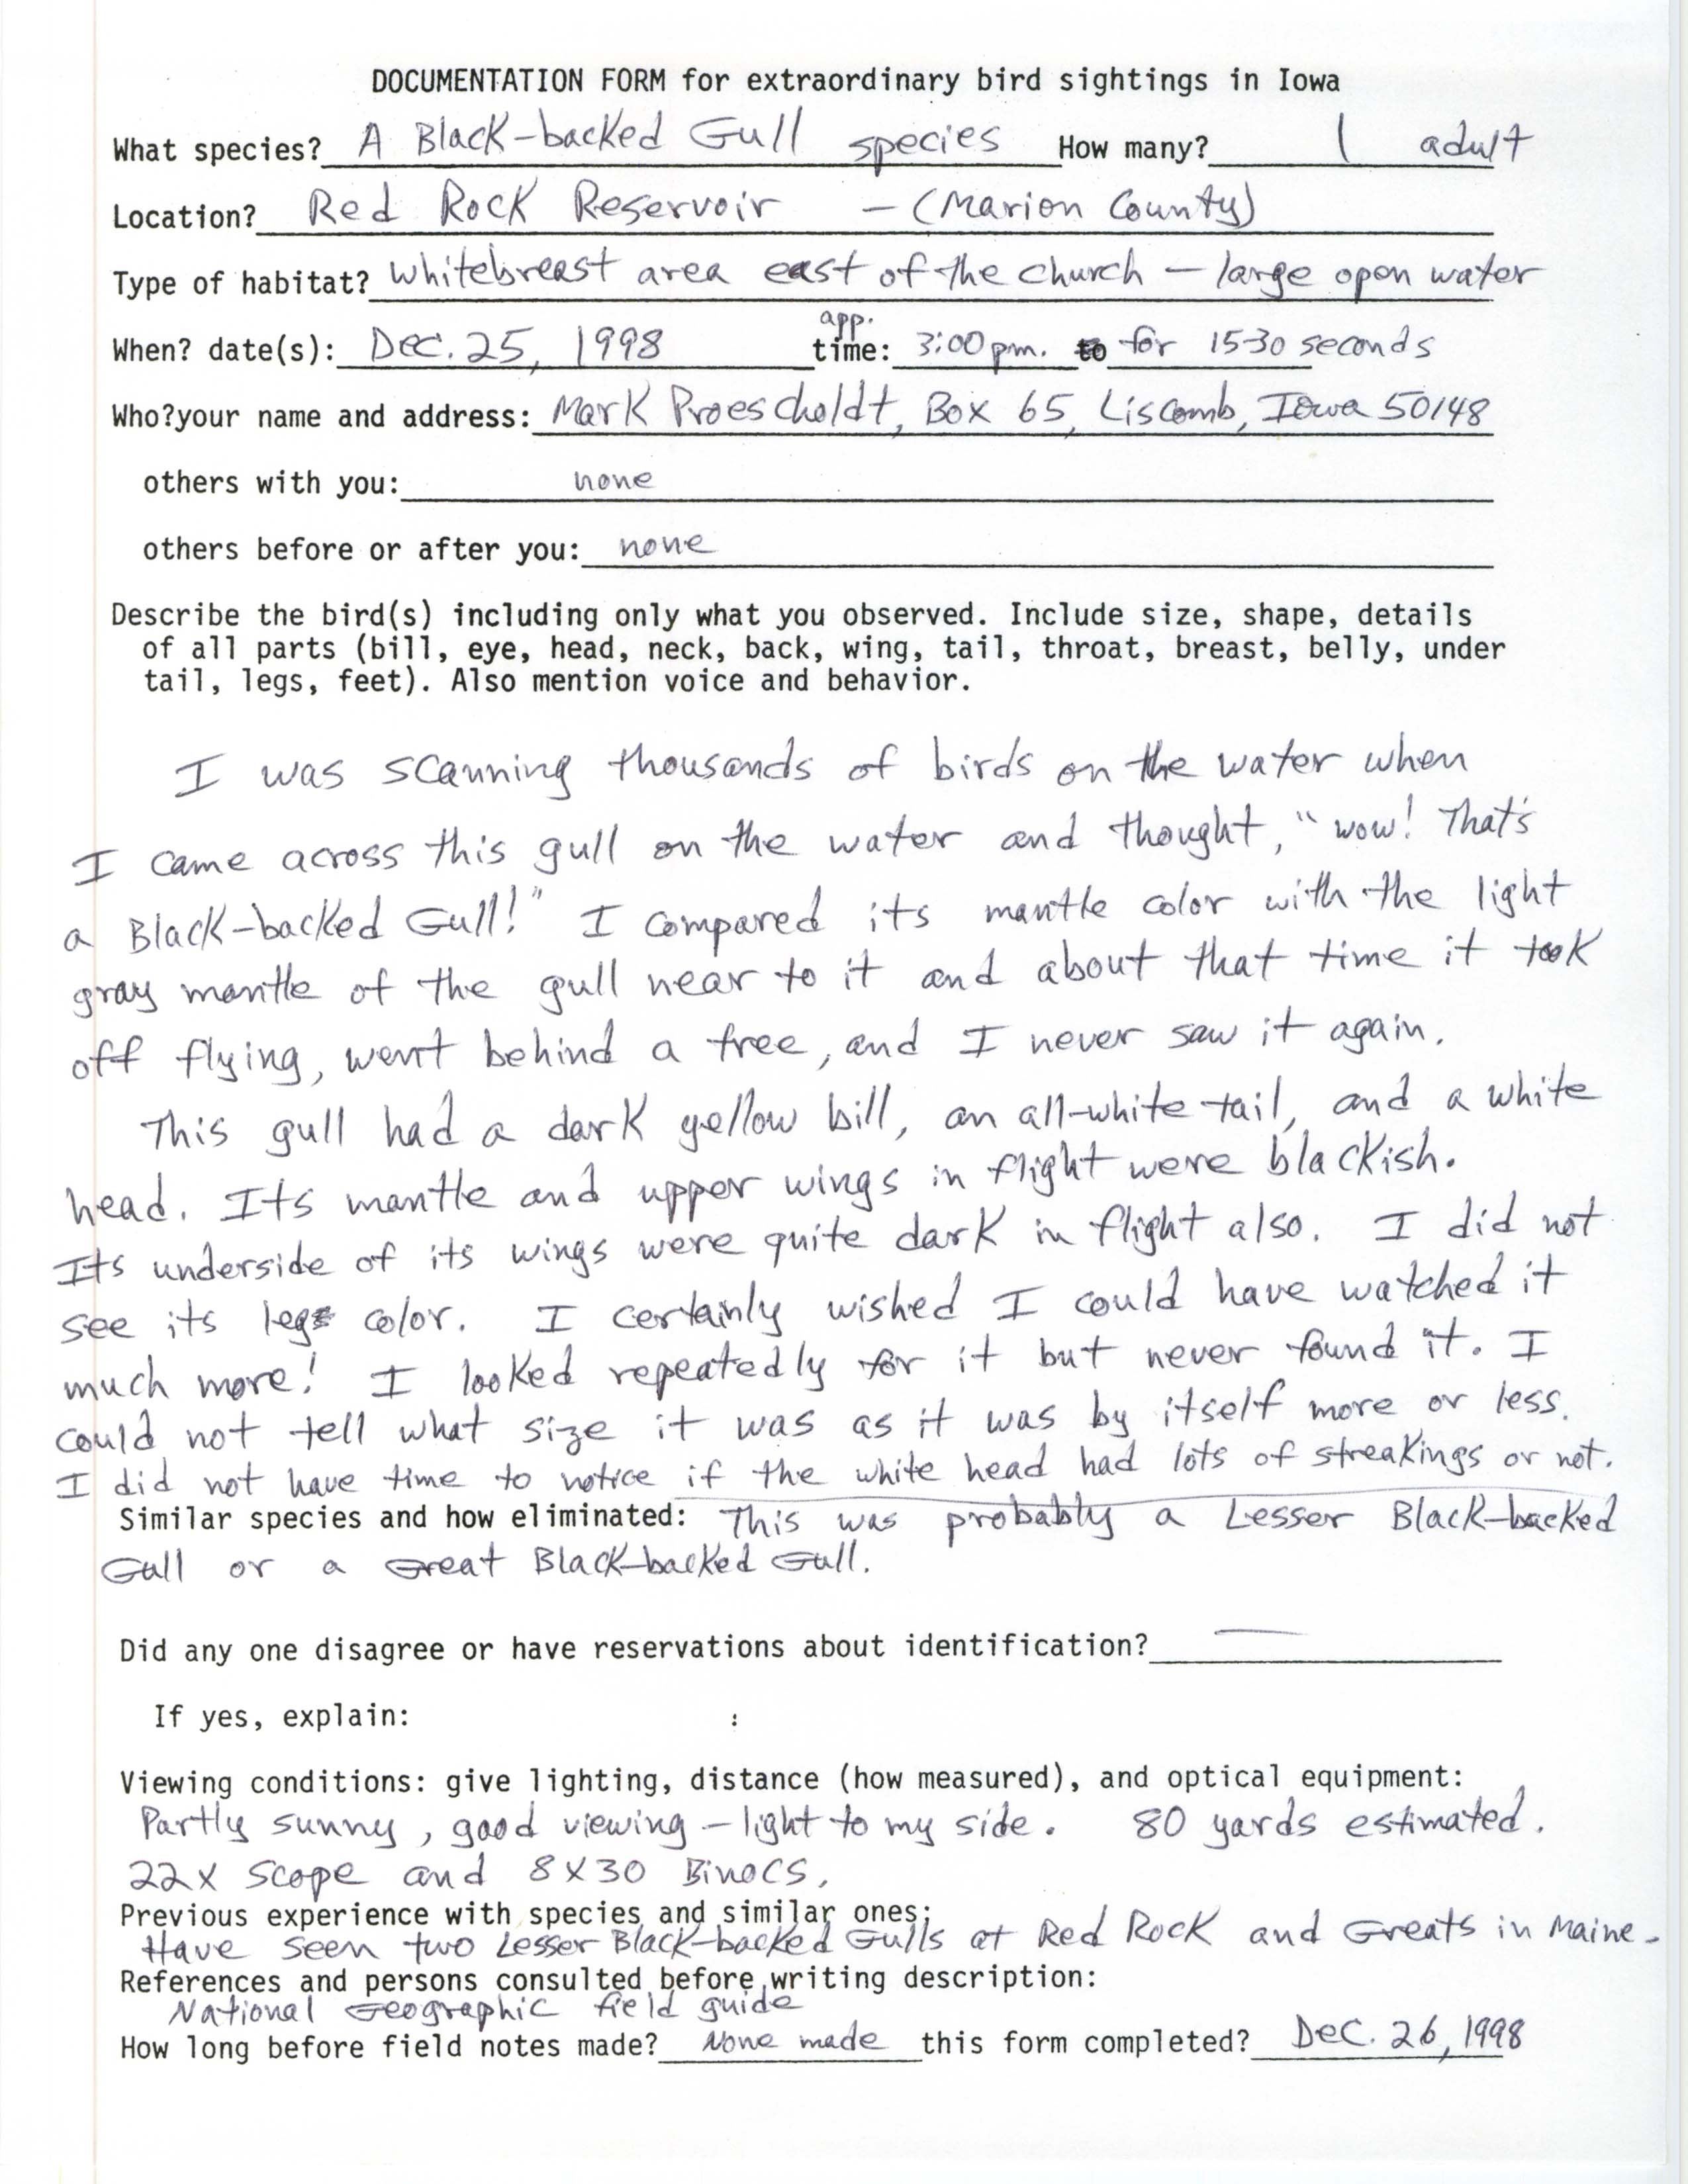 Rare bird documentation form for Black-backed Gull species at Red Rock Reservoir, 1998